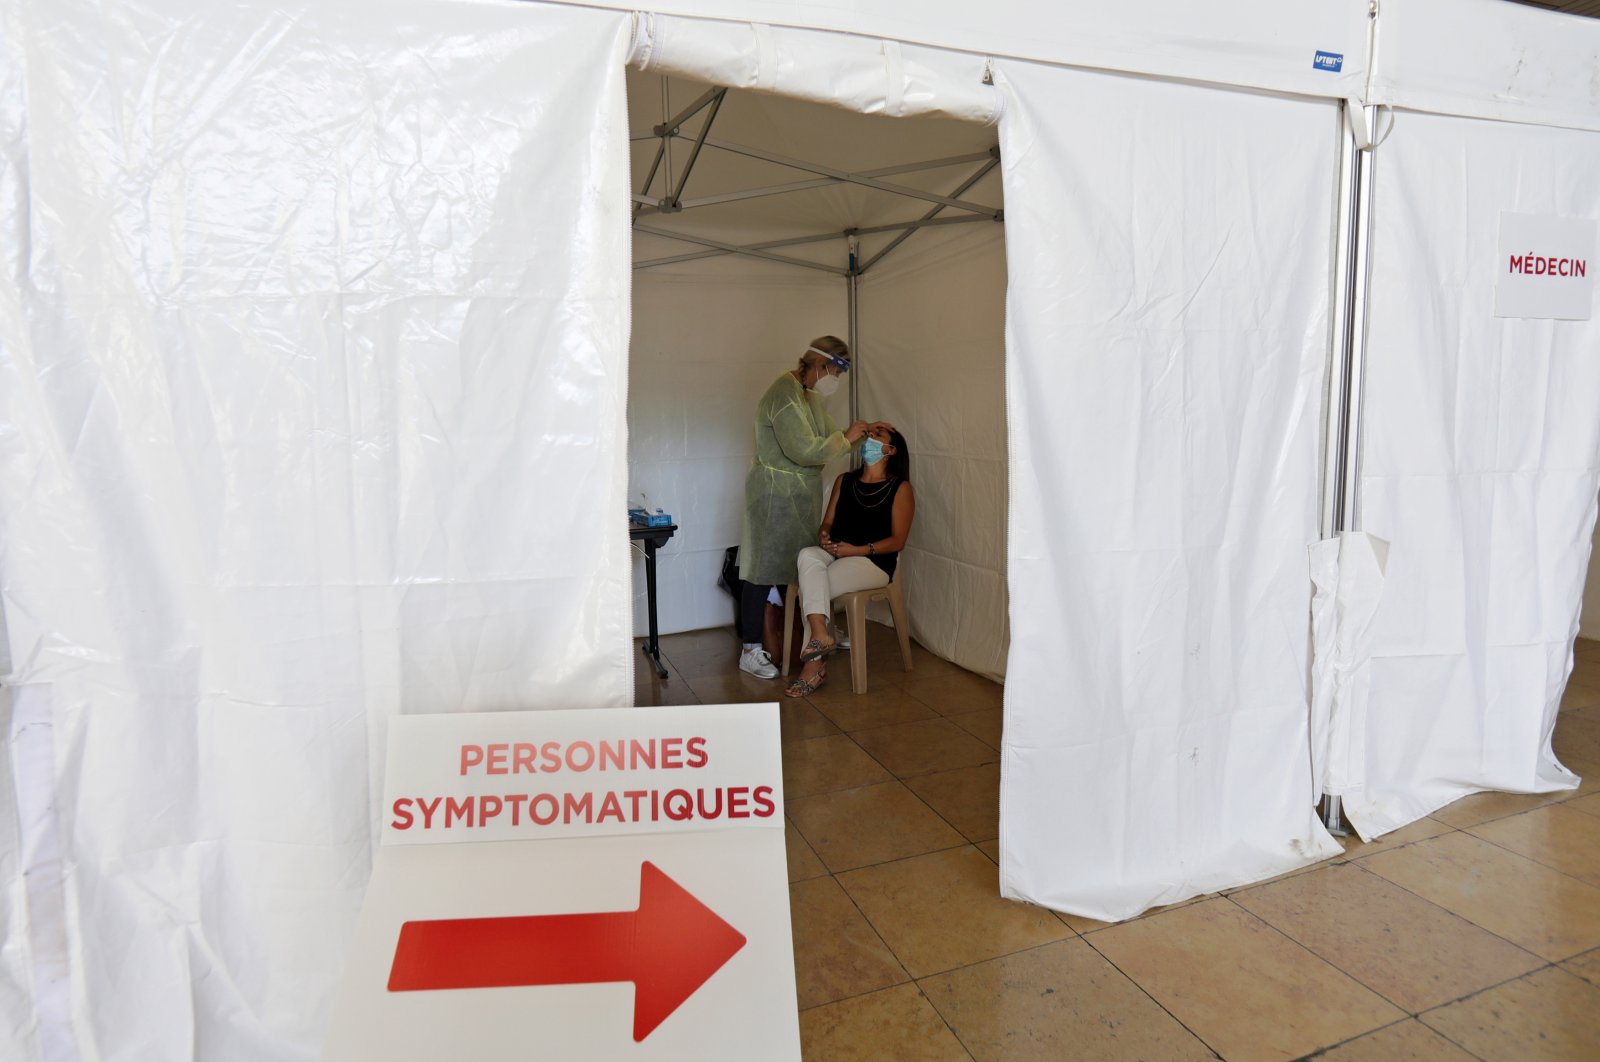 A medical worker, wearing protective suit and face mask, administers a nasal swab to a patient in a testing site, Nice, southern France Sept. 7, 2020. (REUTERS Photo)